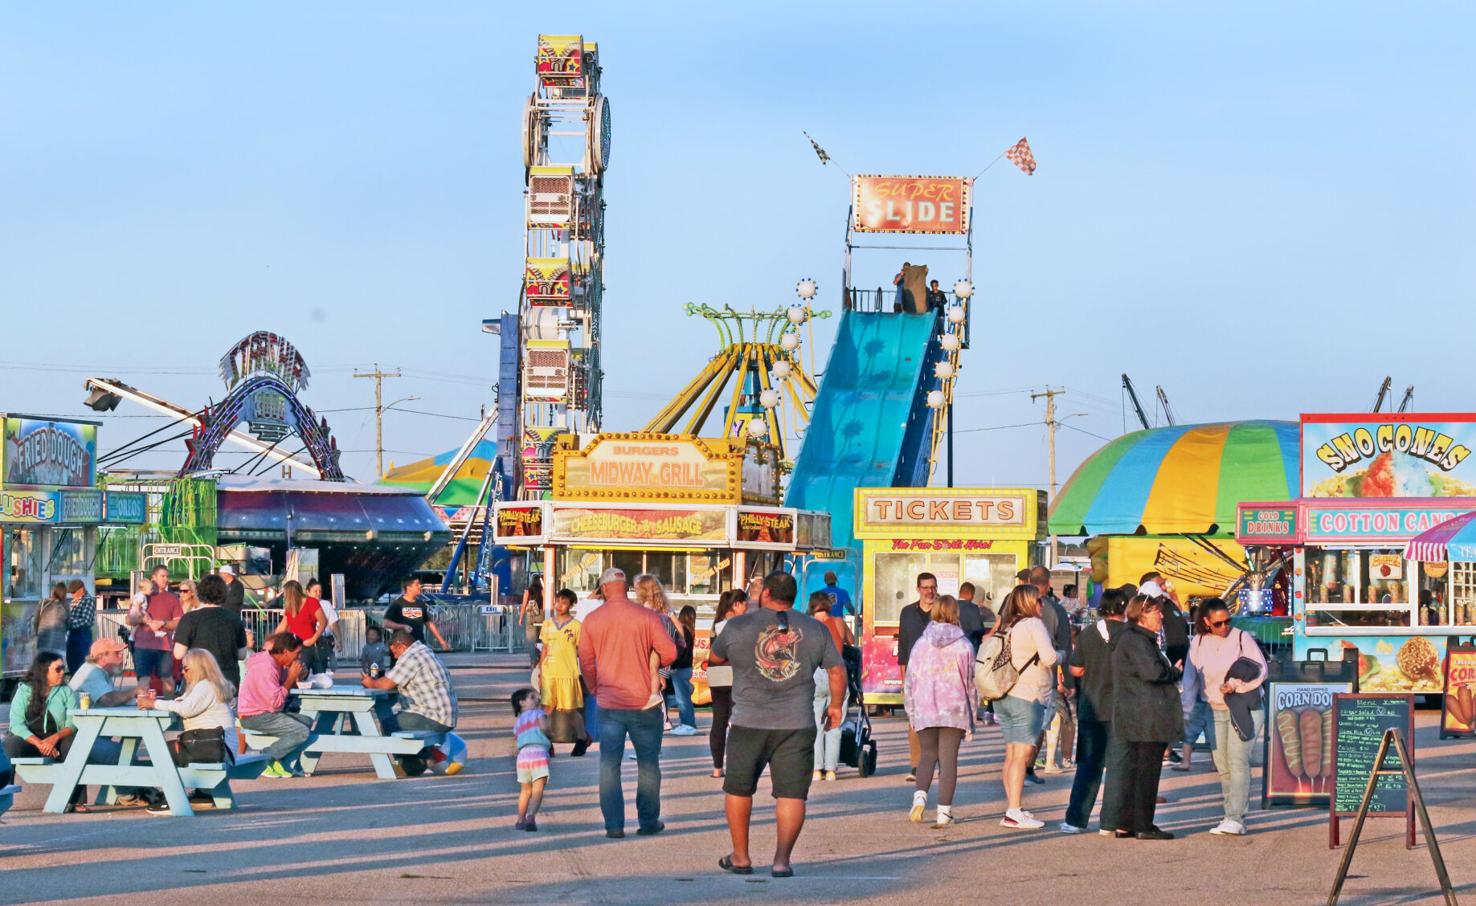 Misquamicut Fallfest returns this weekend with rides, music and fun